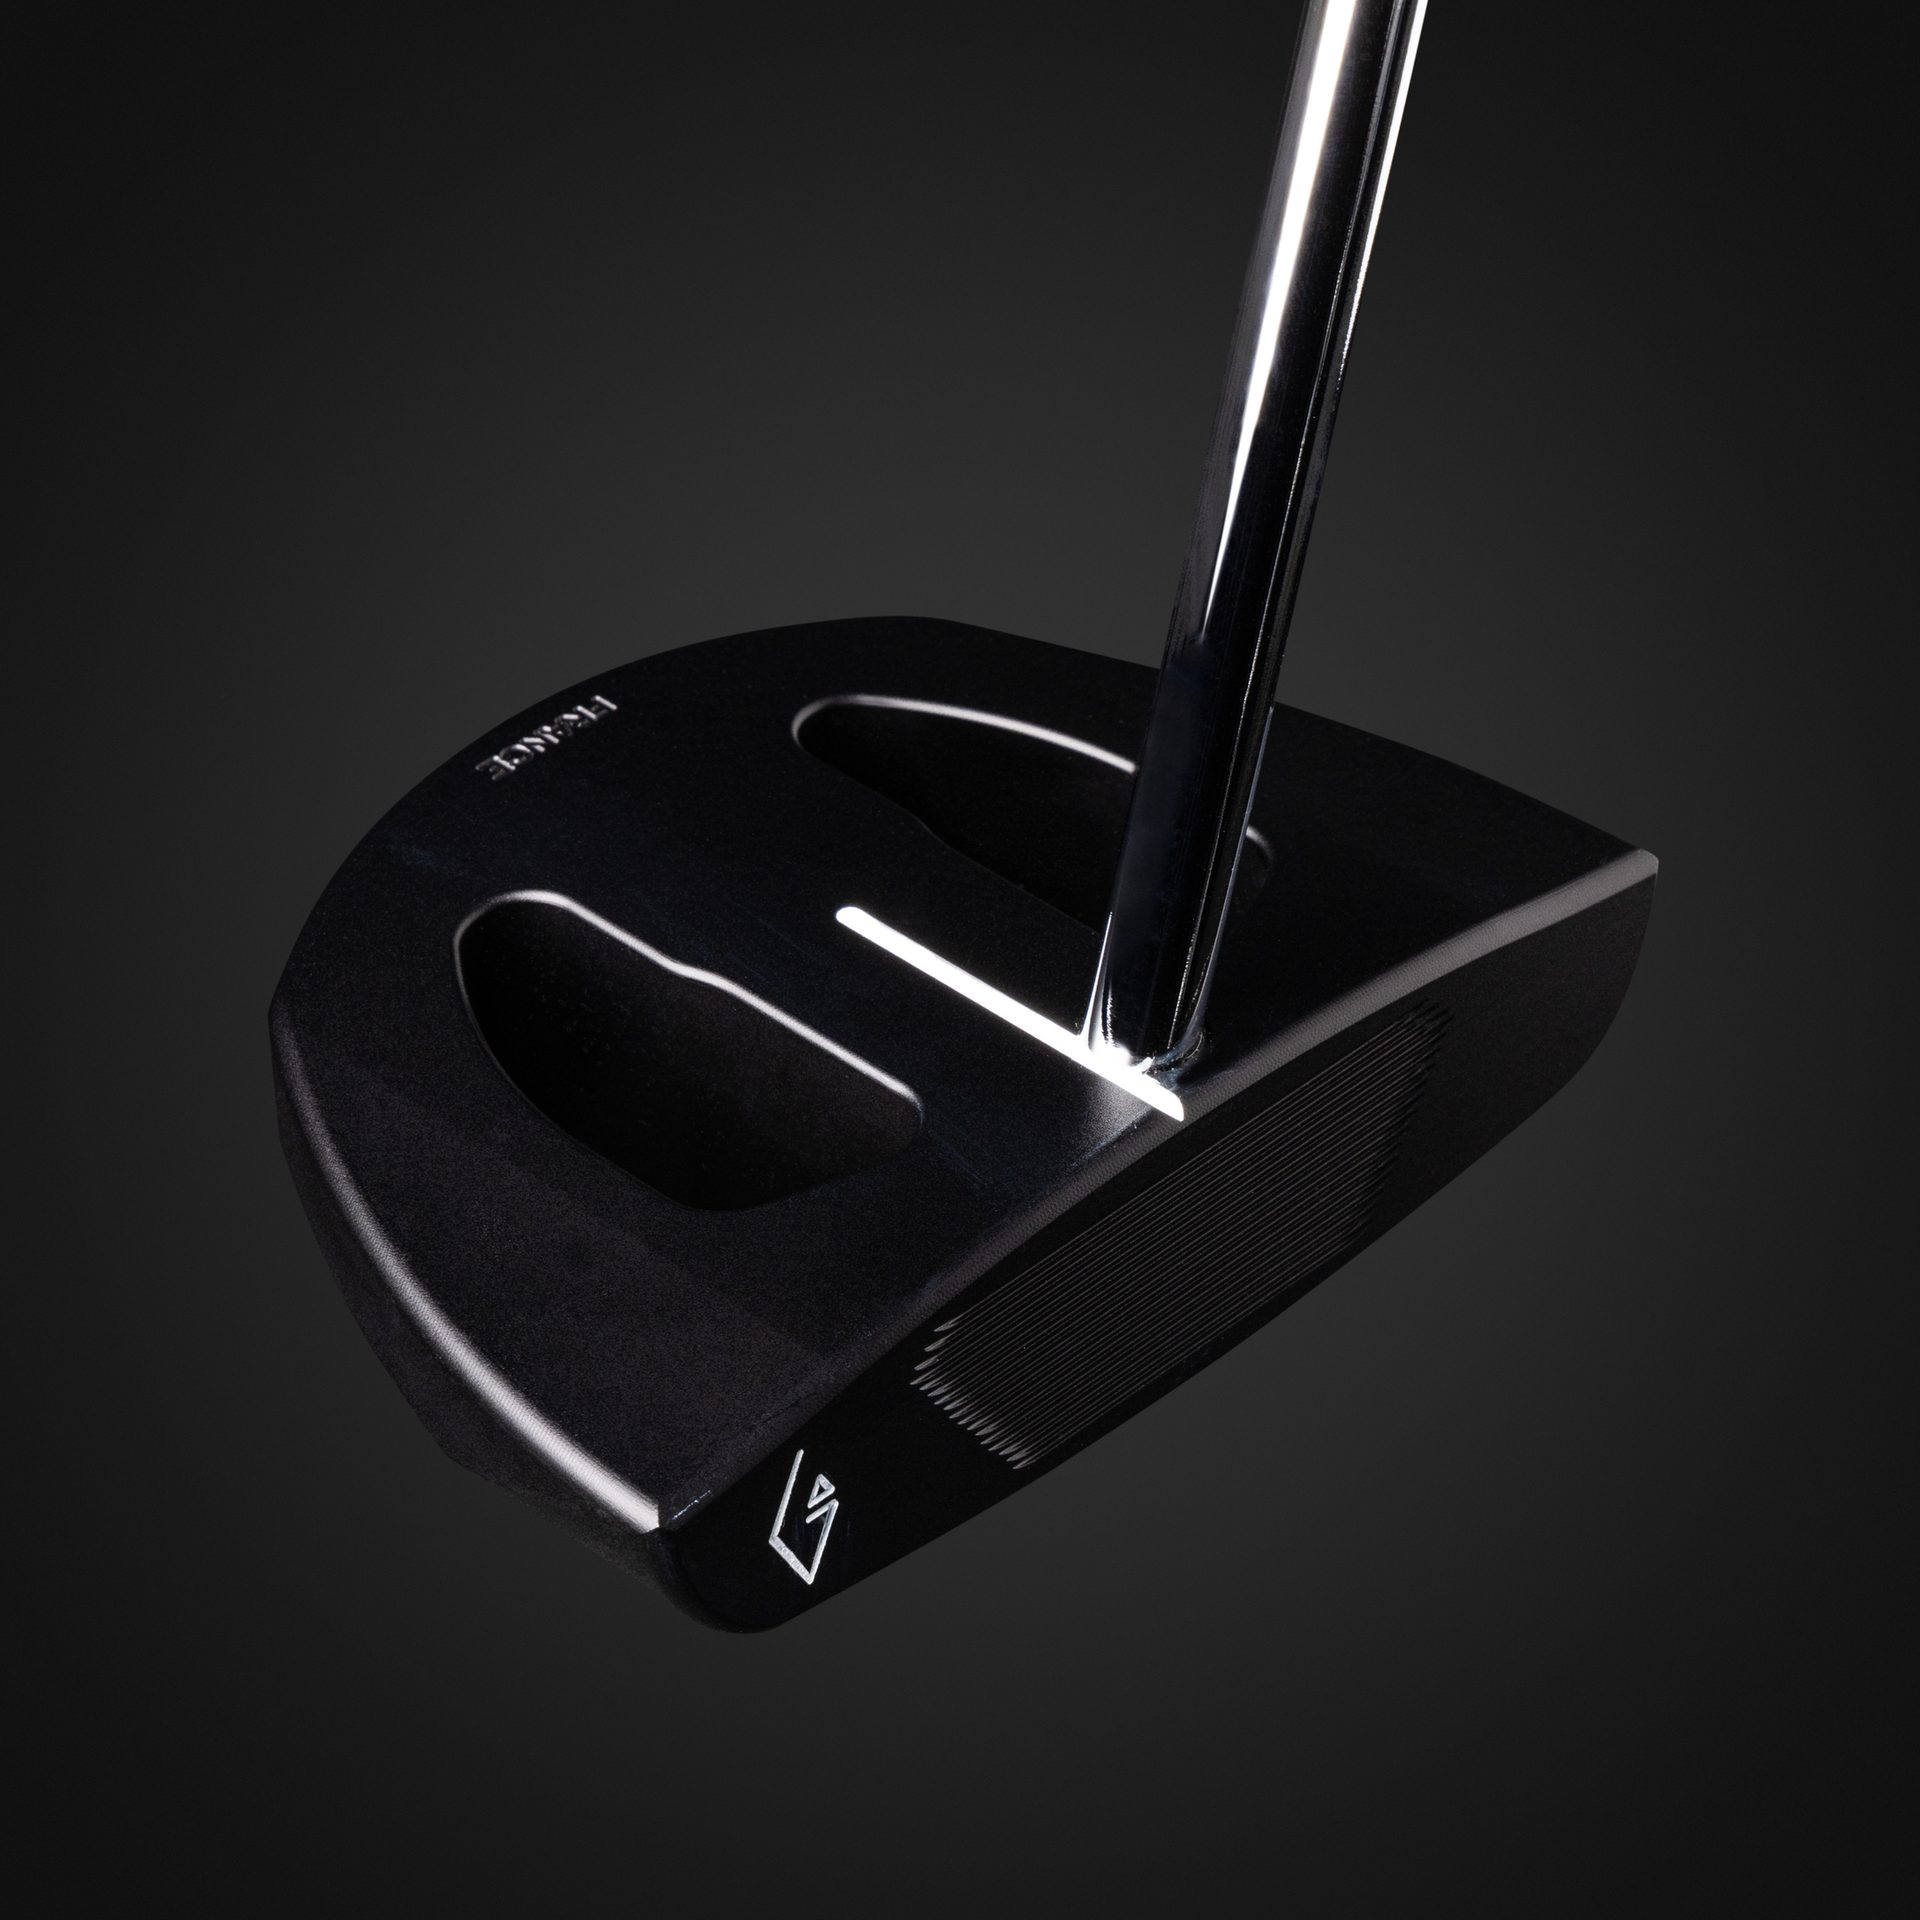 Product photography, golf, putters, products, ar golf, studio photography, golf clubs